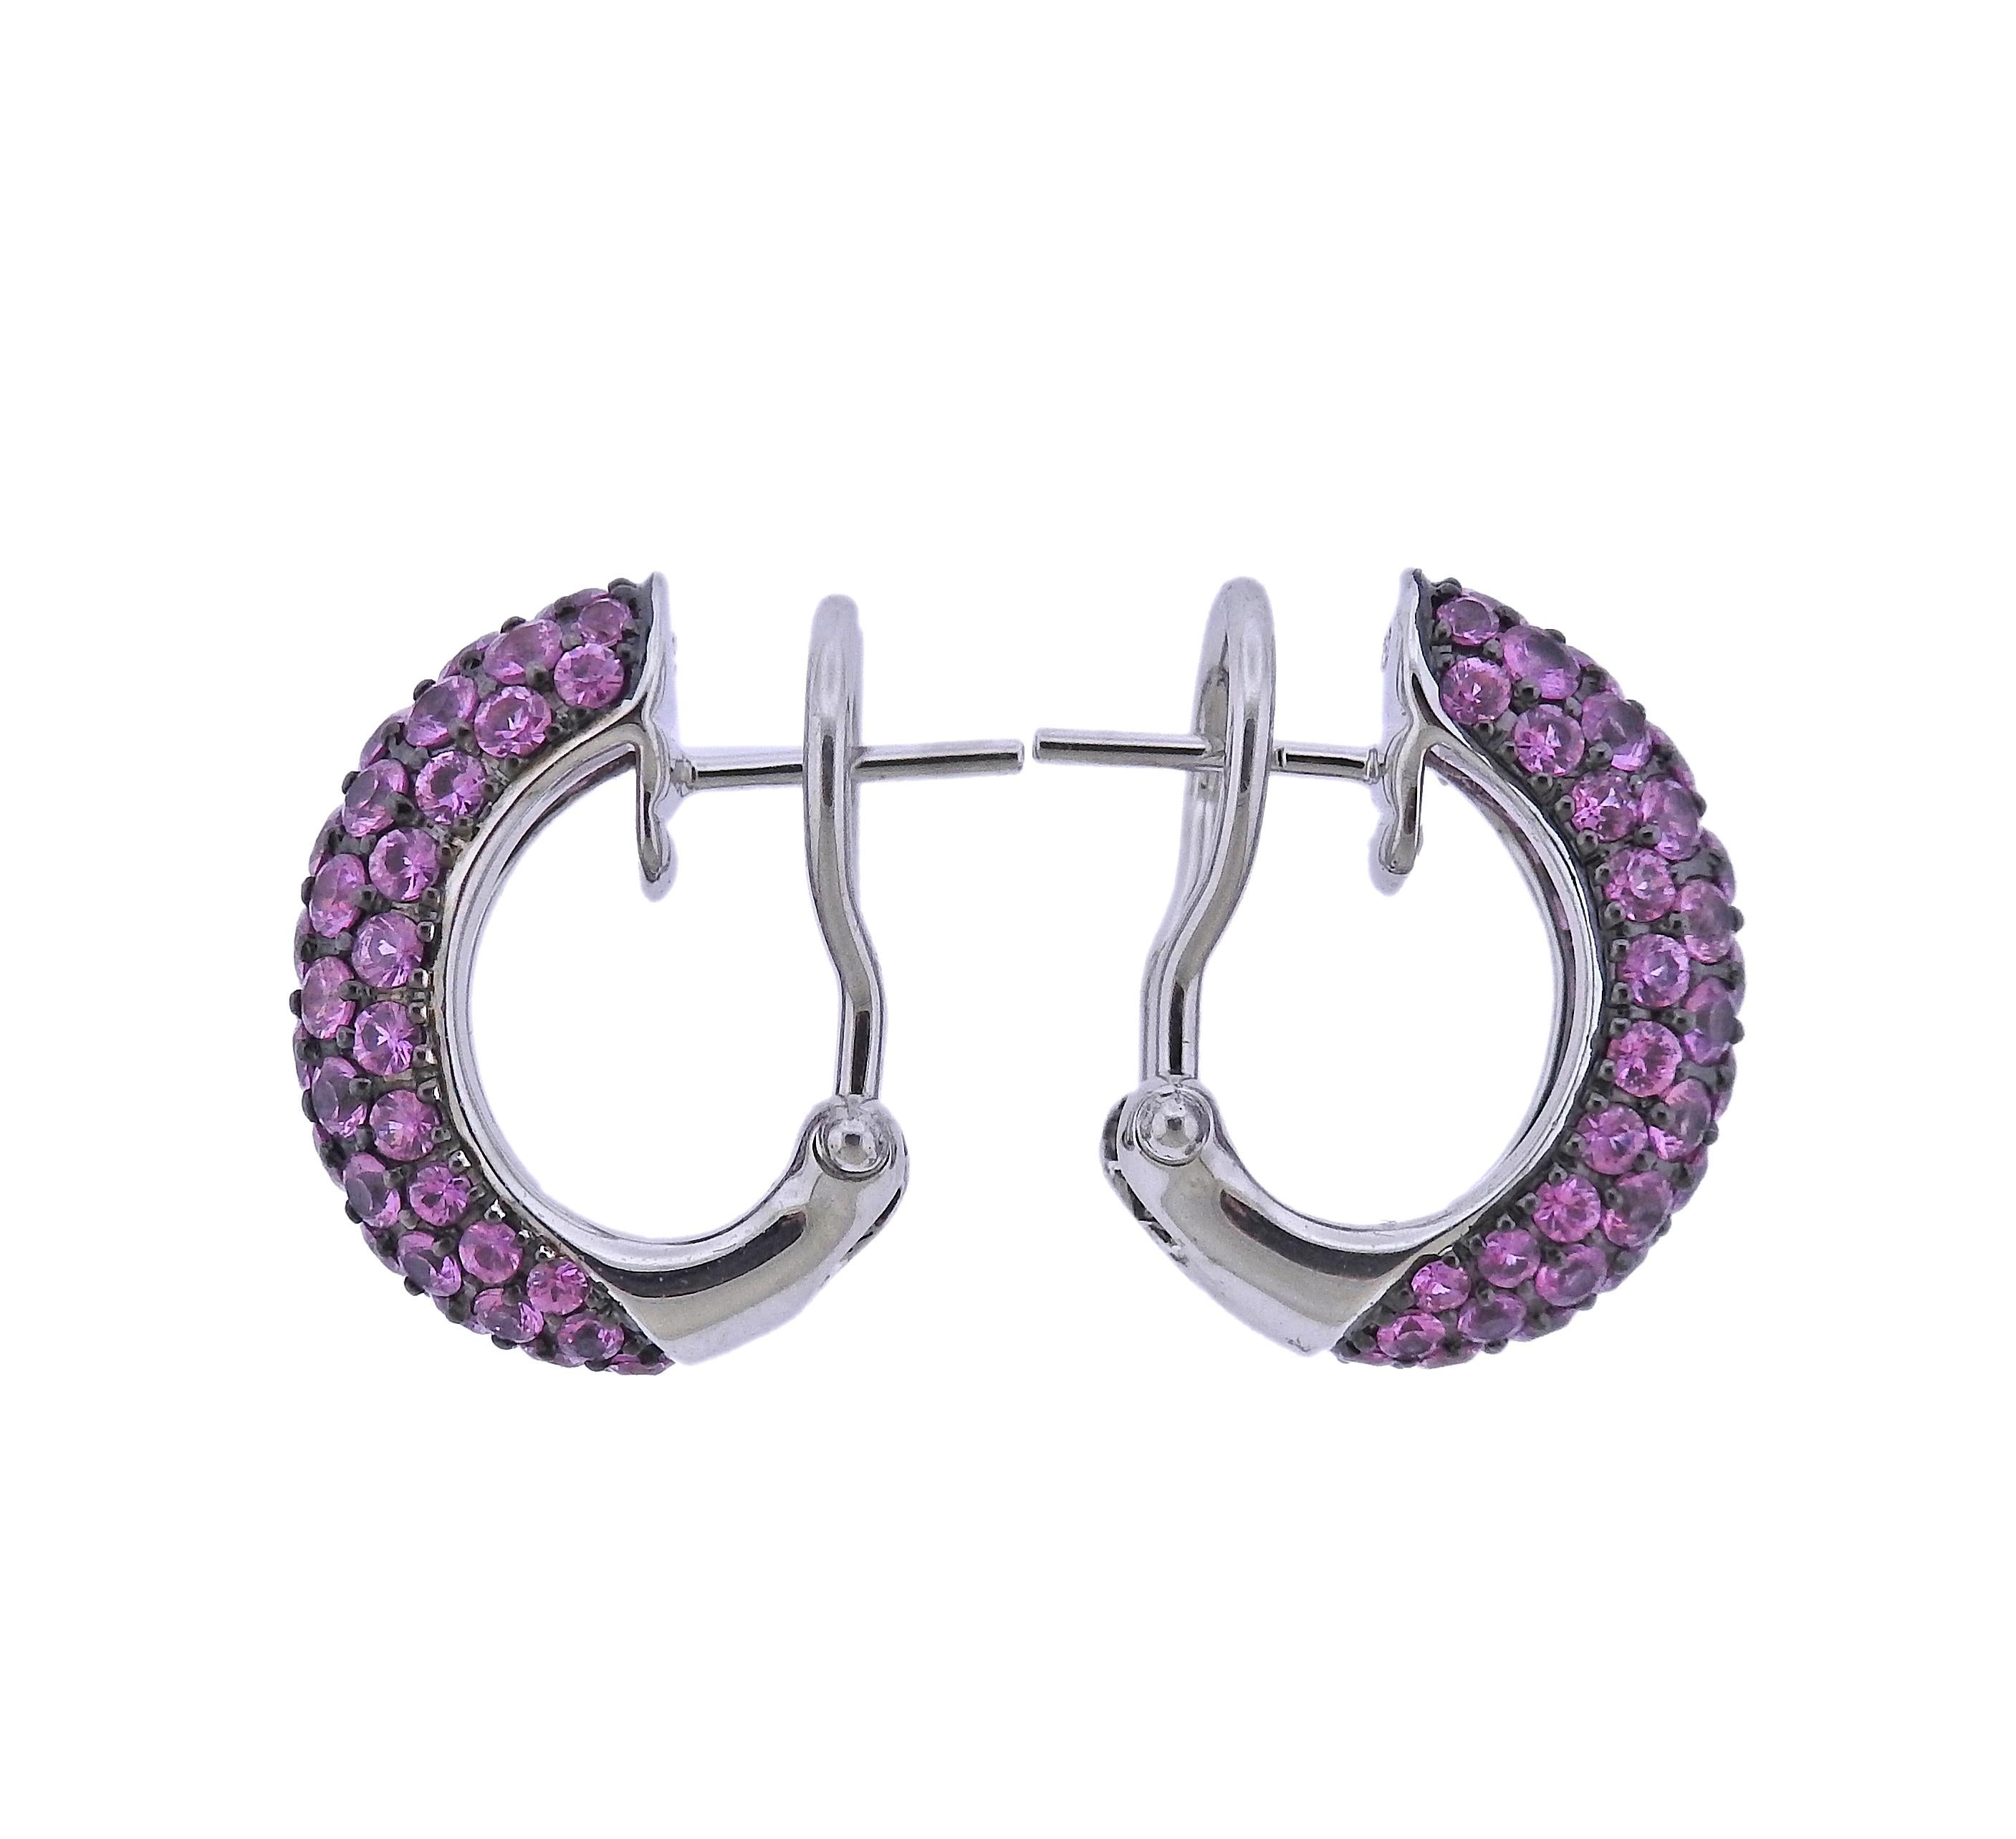 Brand new with tag Bucherer earrings, with 3.73ctw in pink sapphires. Retail $2510. Comes with box.  Earrings are 18mm x 6.5mm. Weight - 8.1 grams. Marked: CB 750.